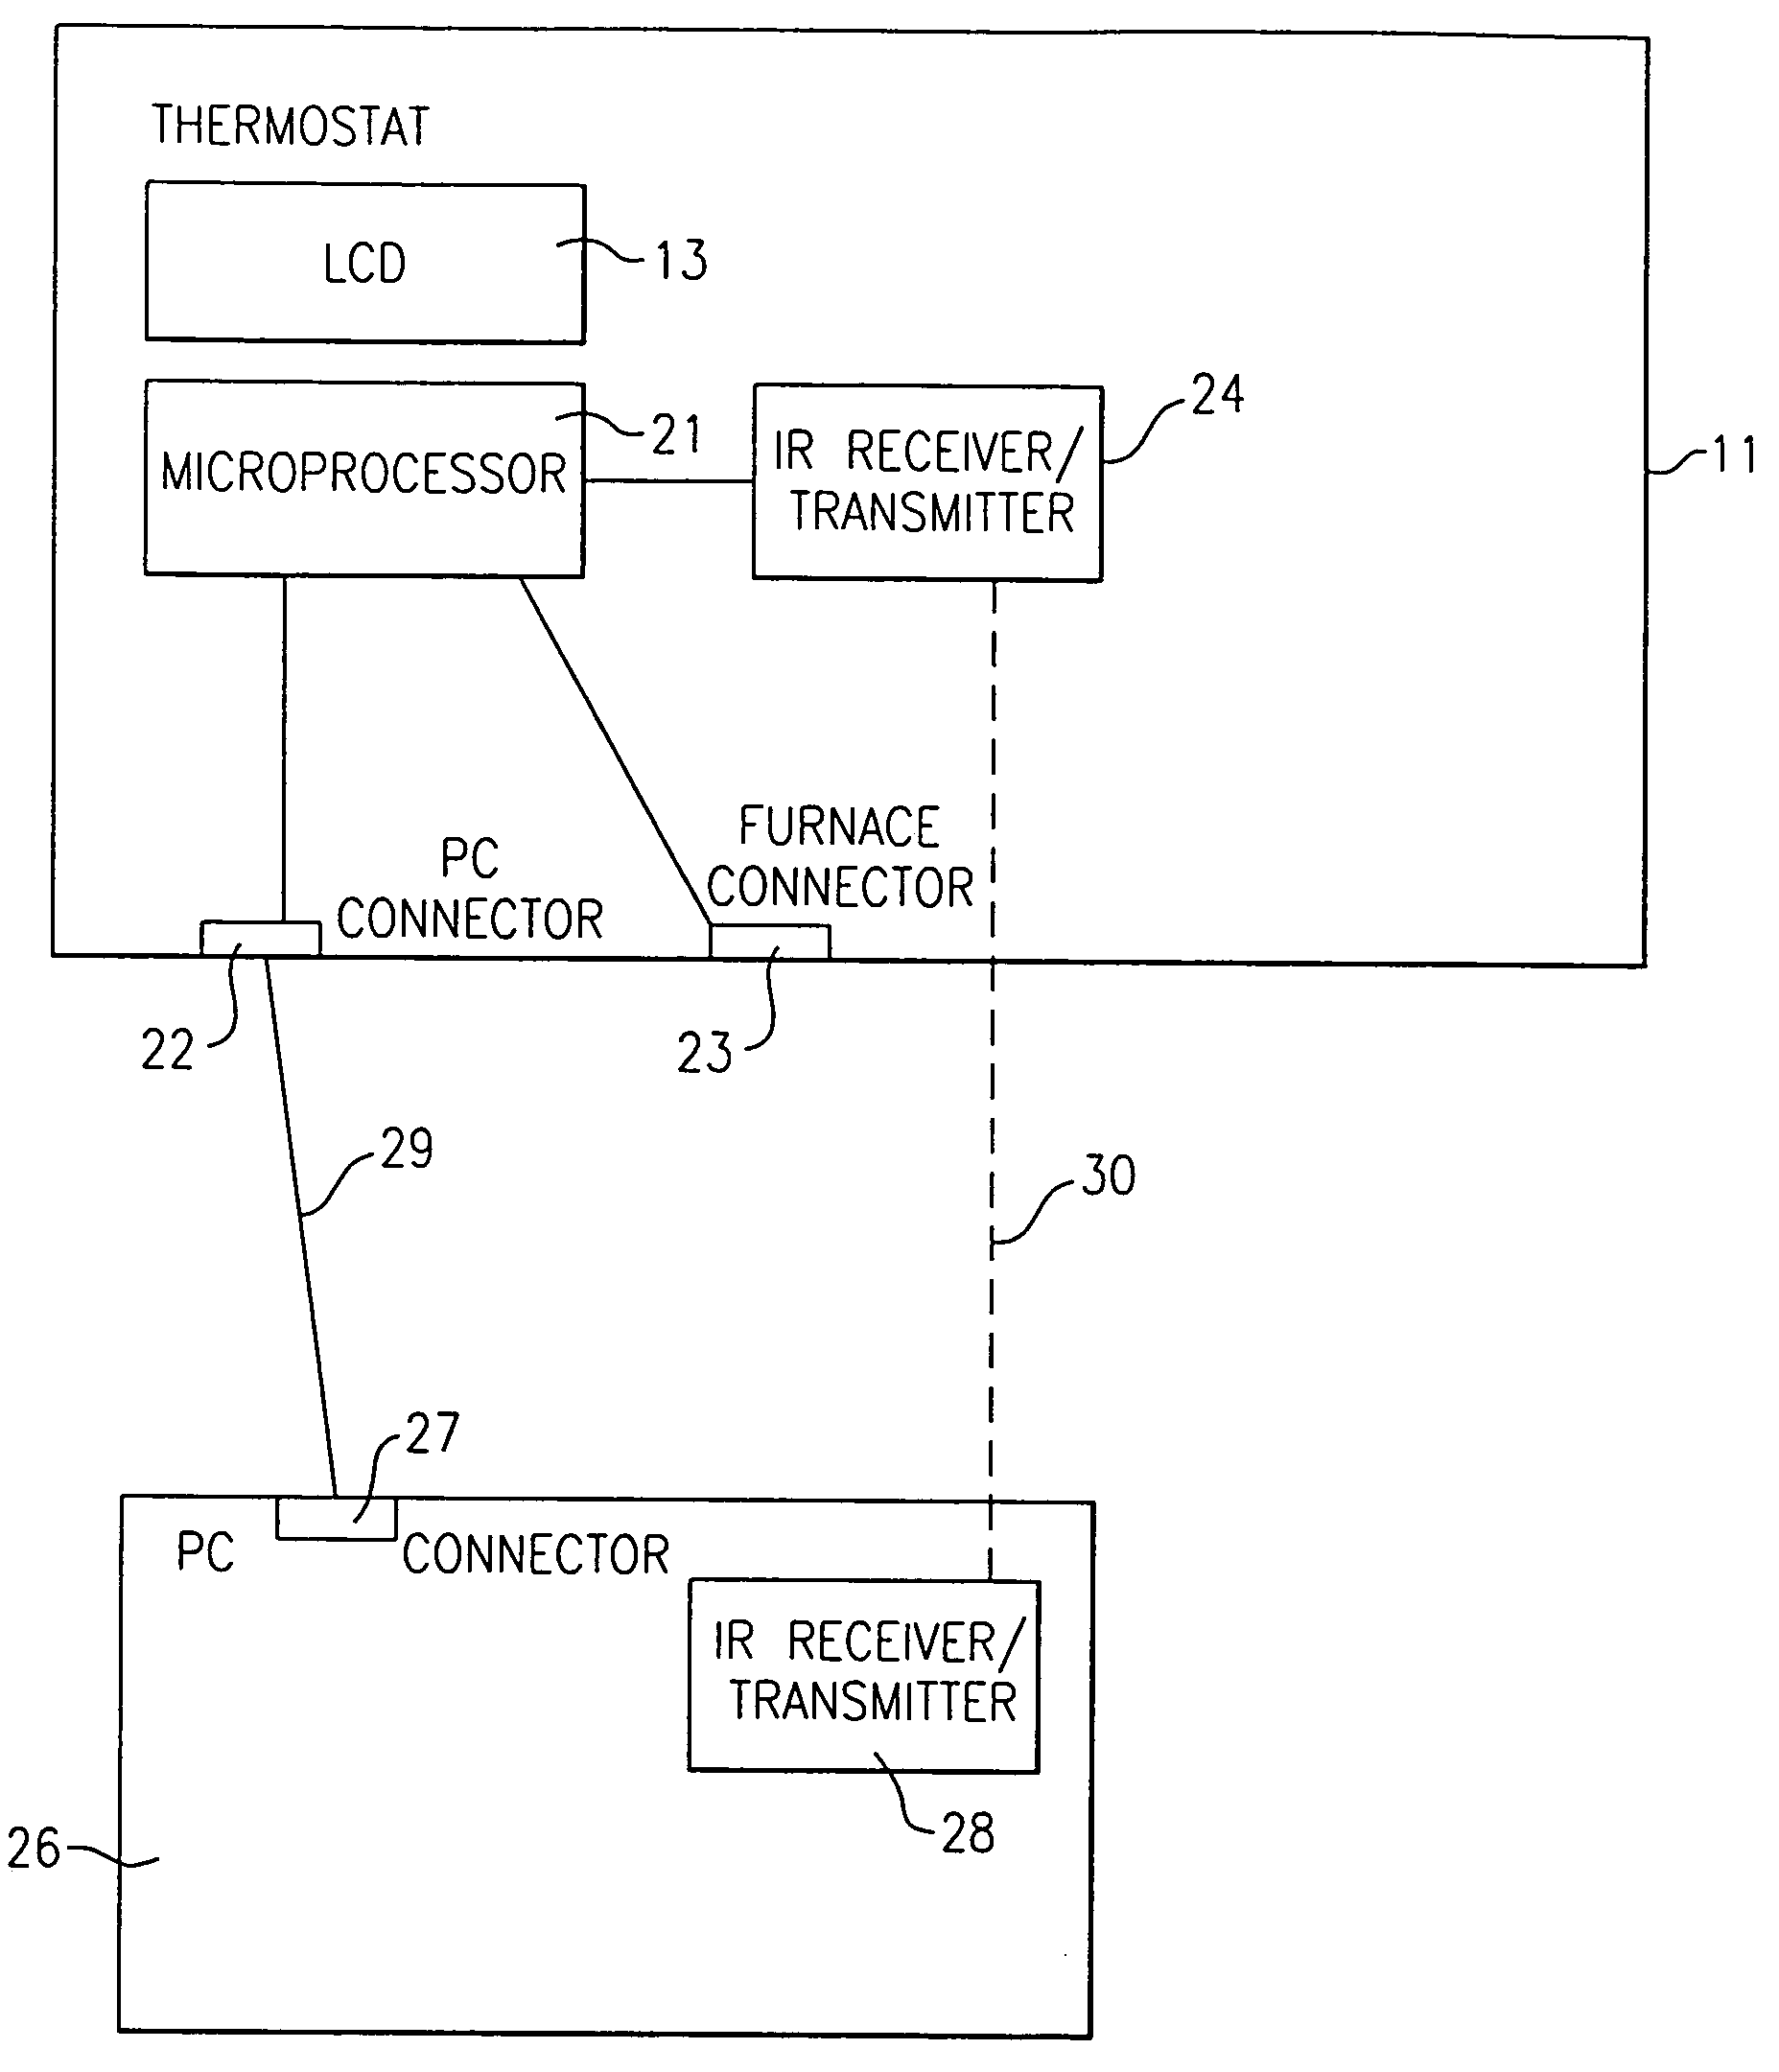 Method for programming a thermostat